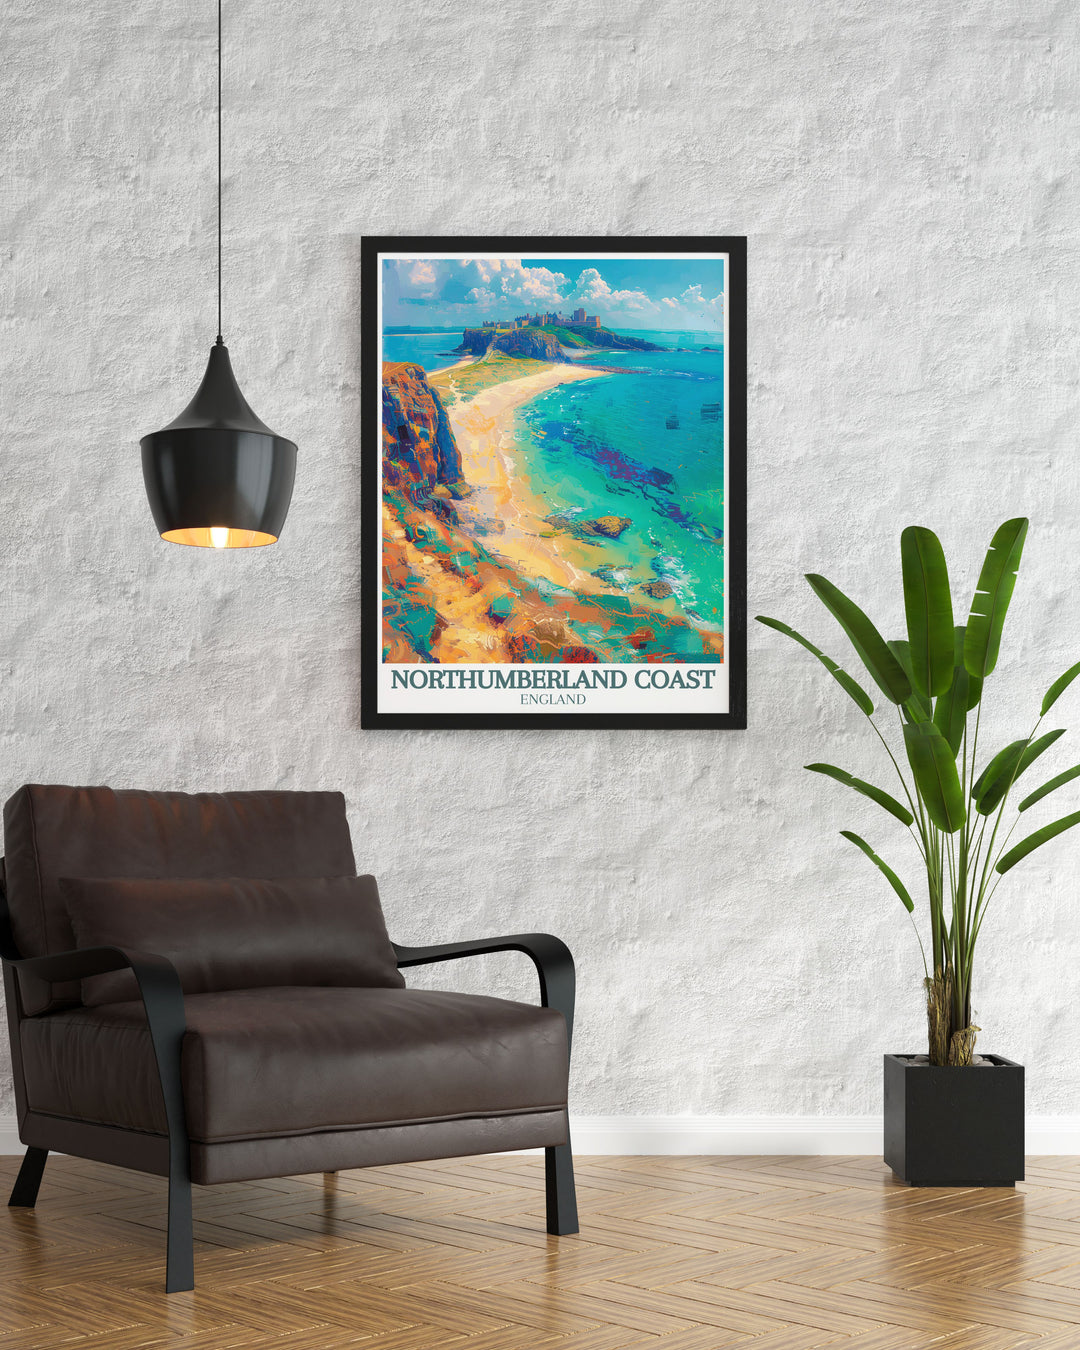 Seaside travel print featuring the stunning landscapes of Northumberlands coastline with Bamburgh Castle and Dunstanburgh Castle prominent in the scene perfect for enhancing your home with a touch of historical beauty.